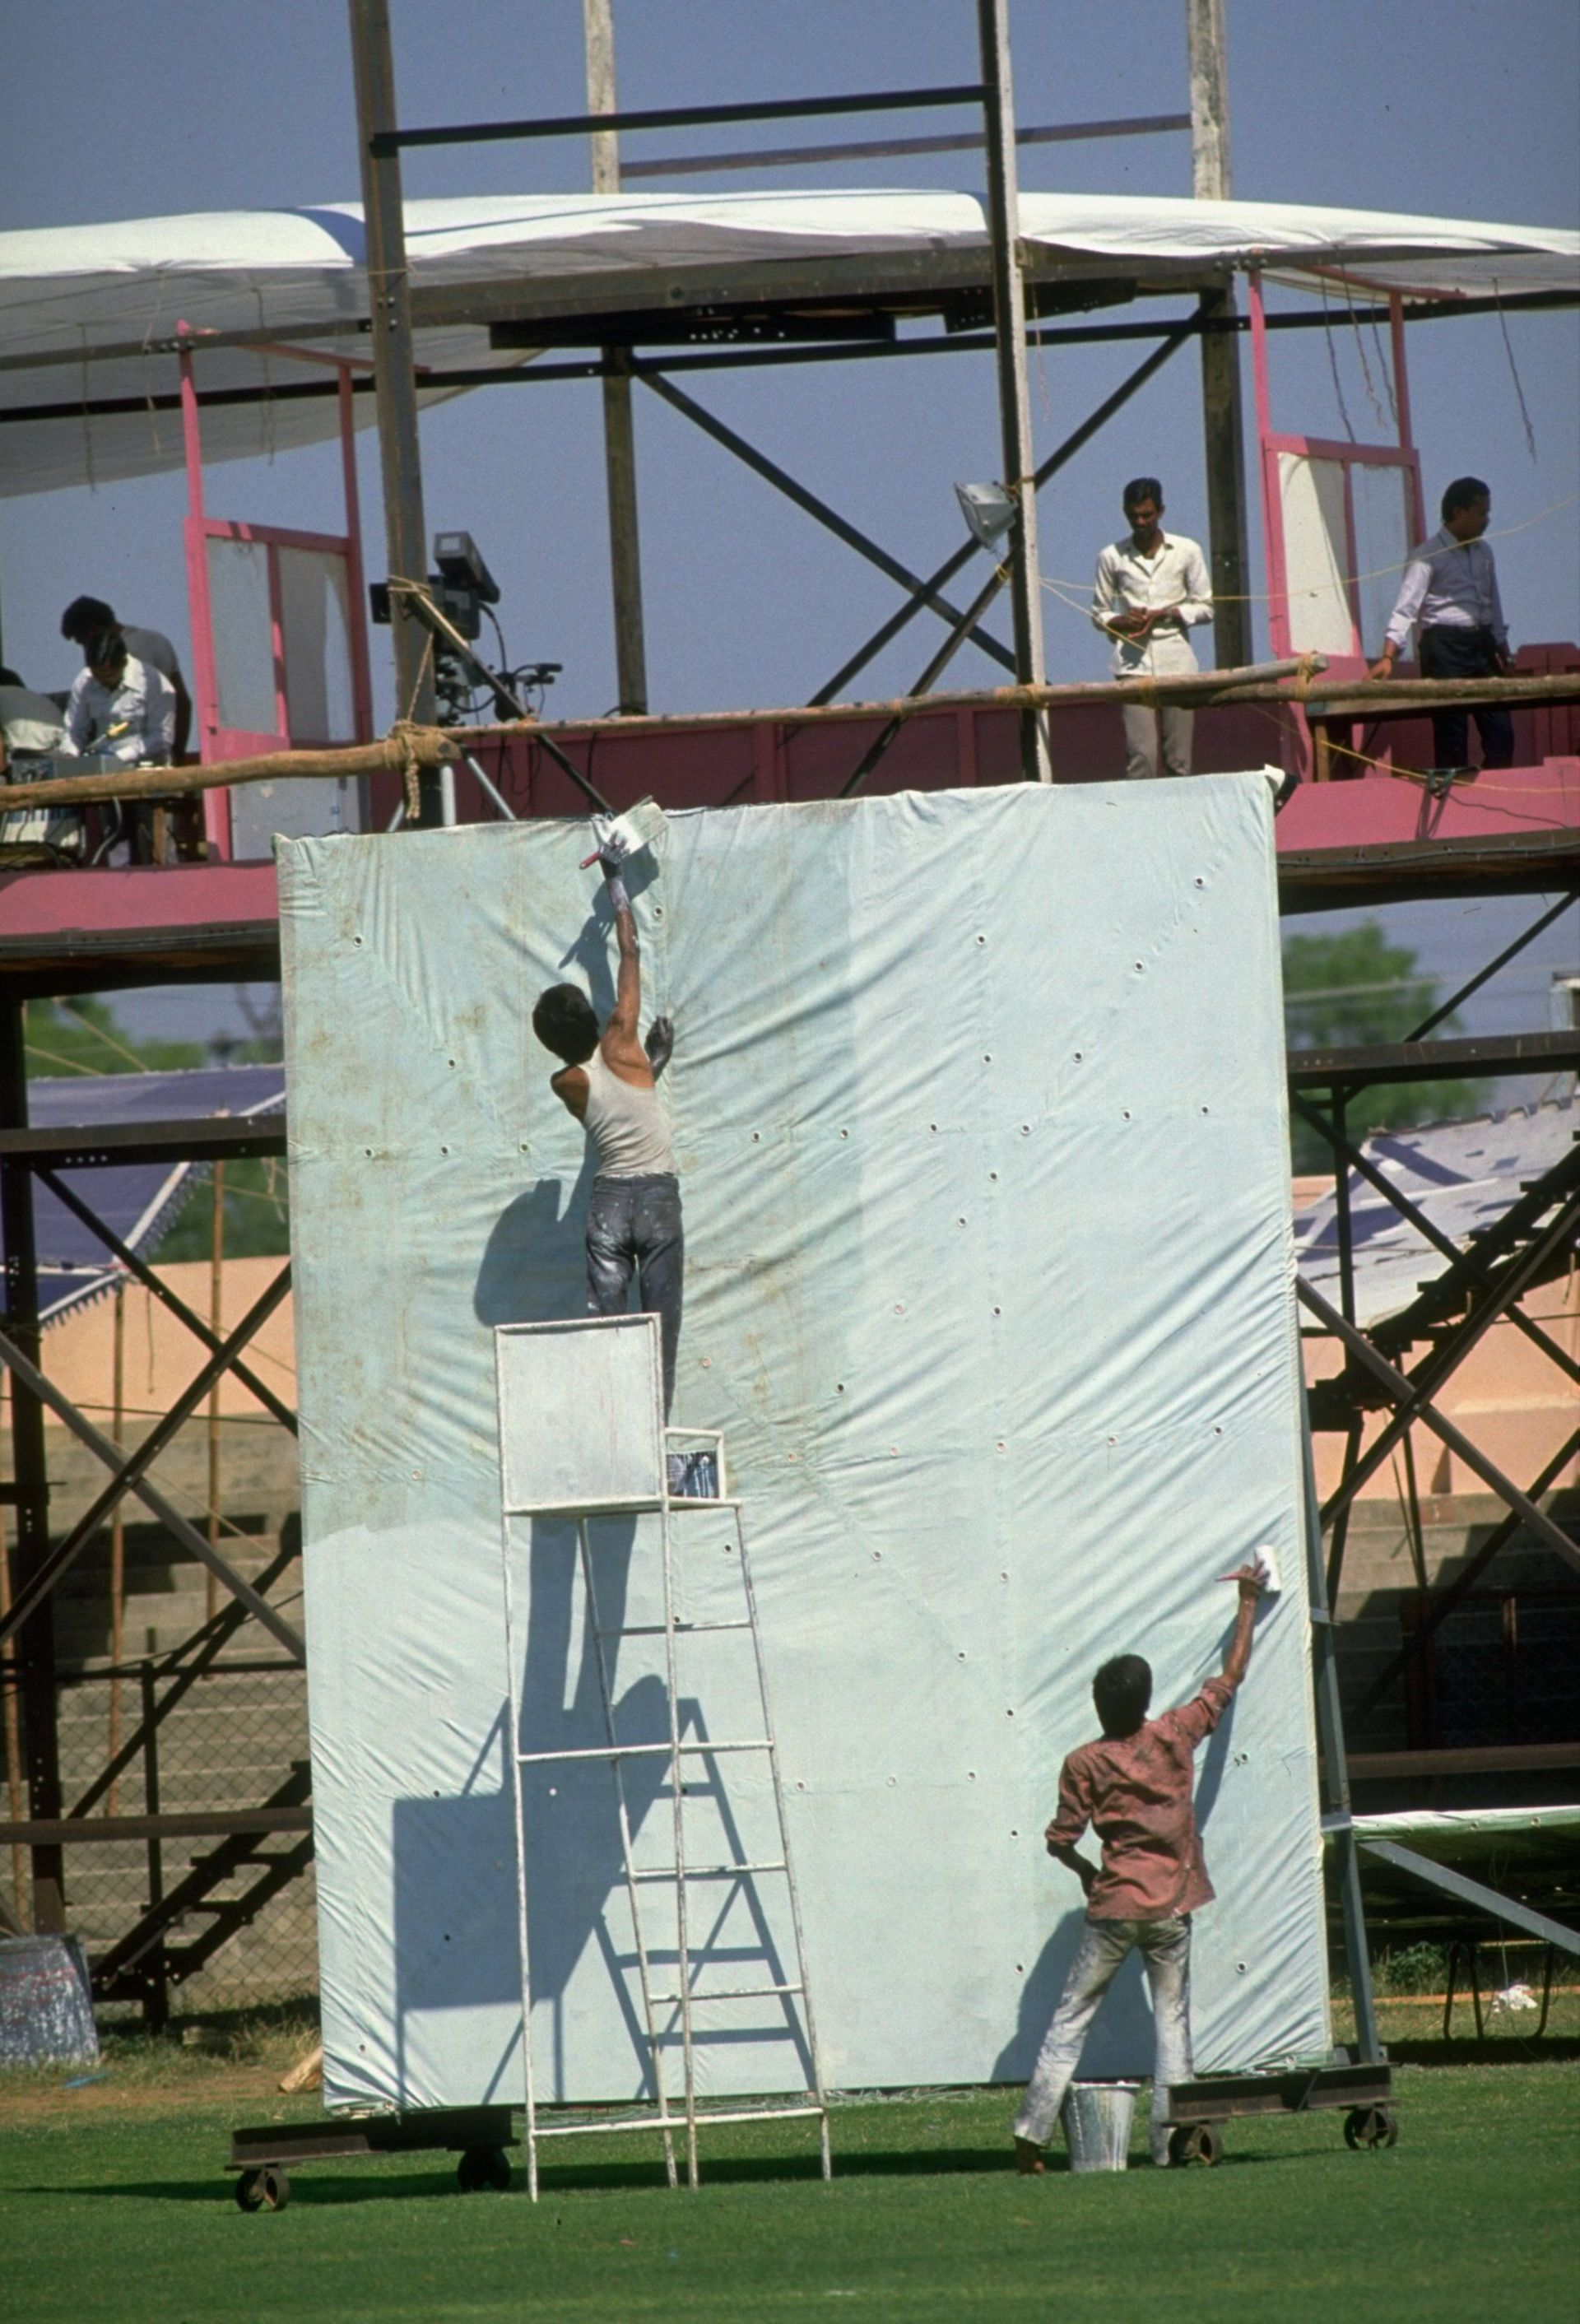 A sightscreen being painted during the 1987 World Cup.